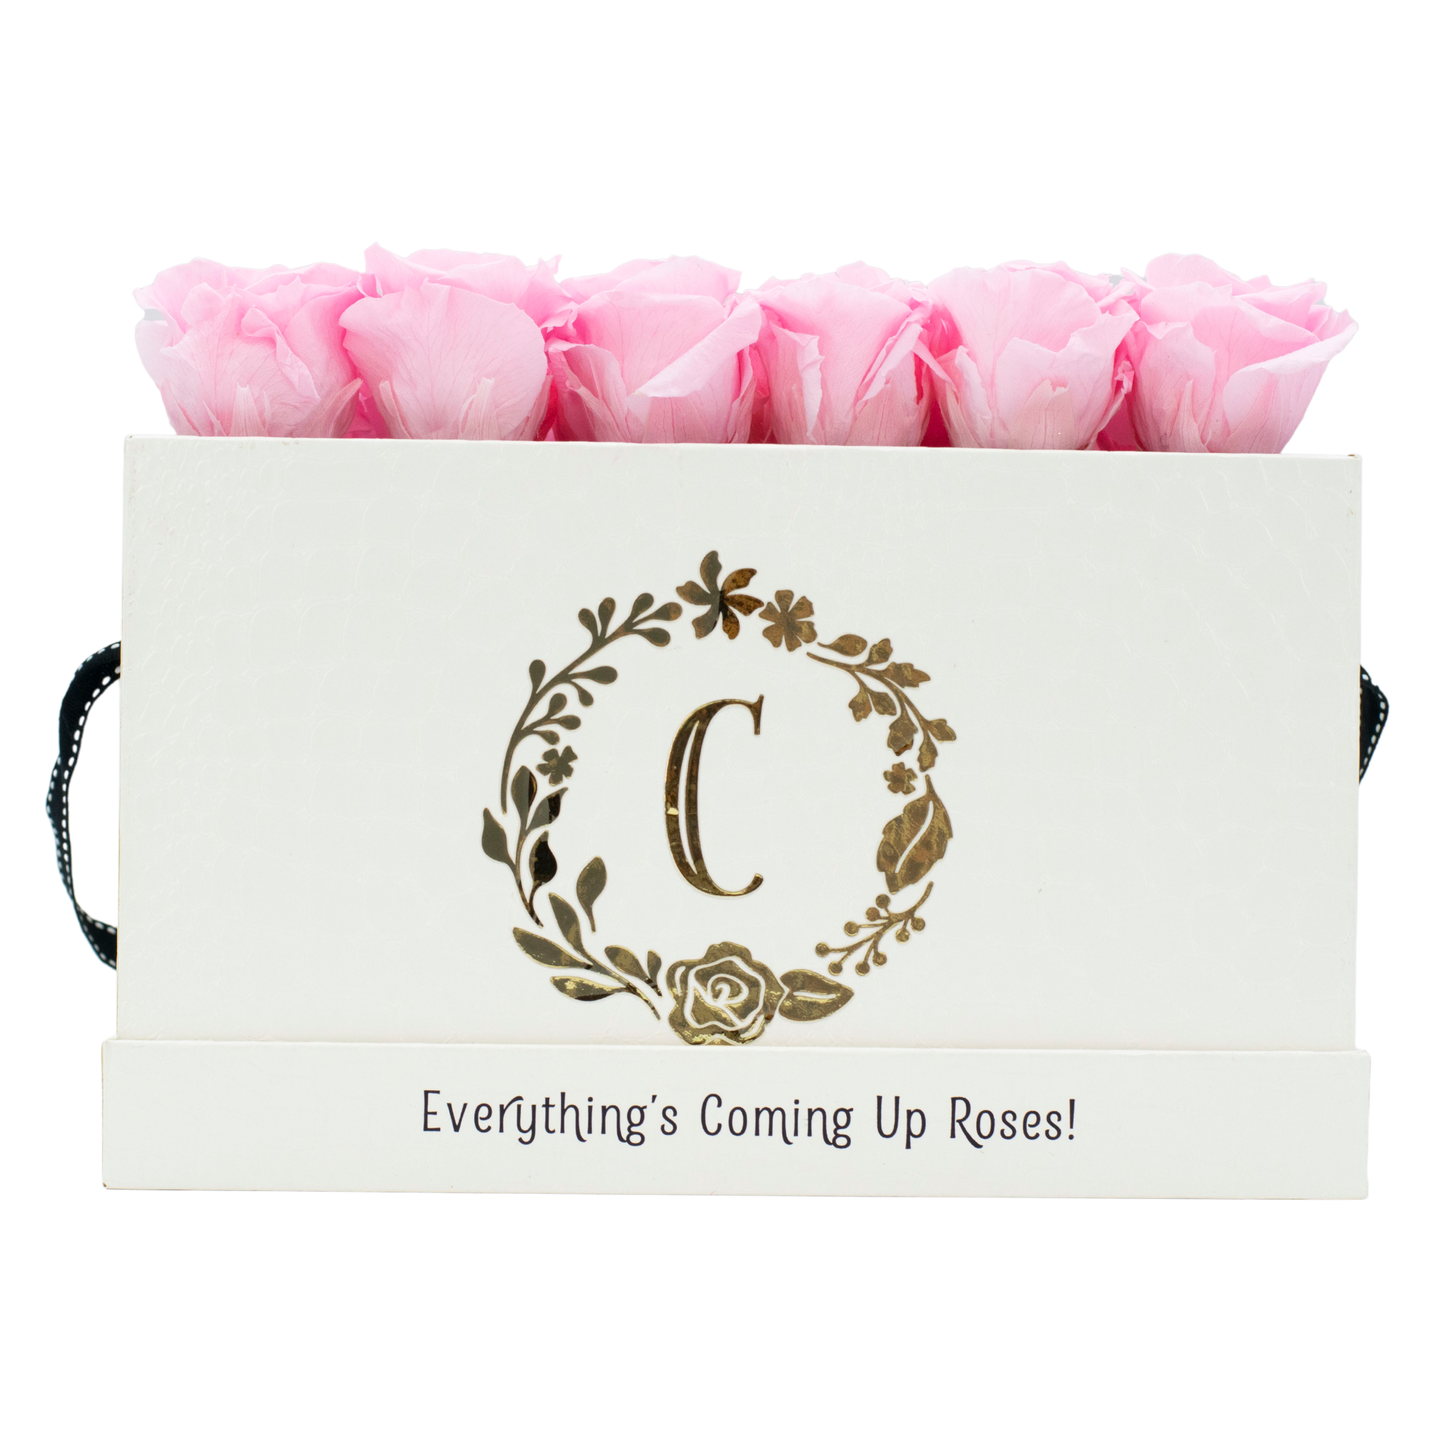 The White Monogrammed Keeper by the Dozen - Cotton Candy Roses